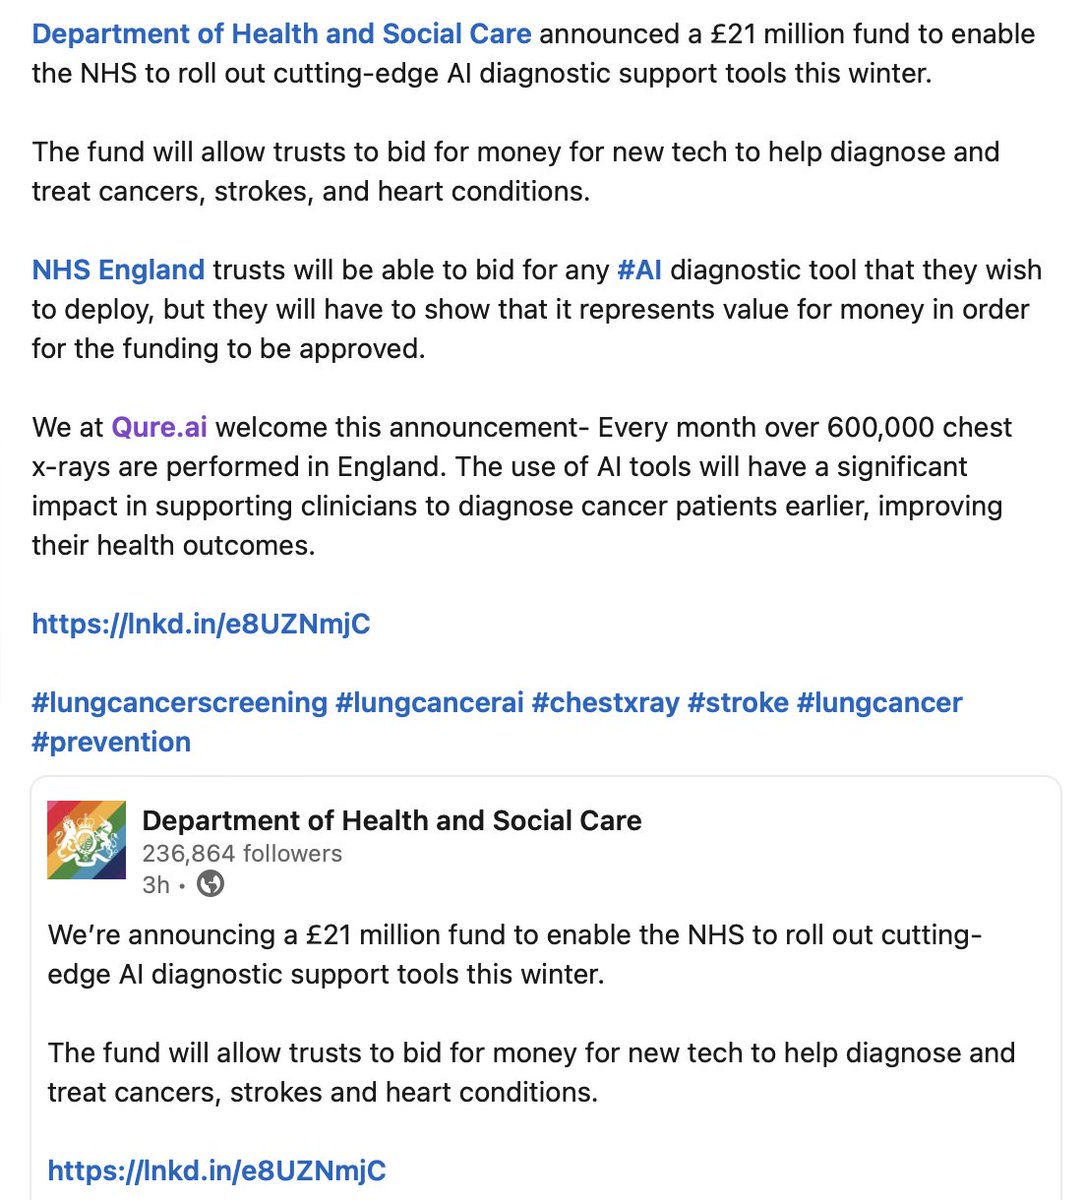 @NHSEnglandLDN trusts will now be able to bid for any diagnostic tool that they wish to deploy. The £21 million fund allocated by @DHSCgovuk will help new tech dev to help diagnose #stroke, and heart conditions. #lungcancer #cxr @qure_ai tinyurl.com/mvybdaux